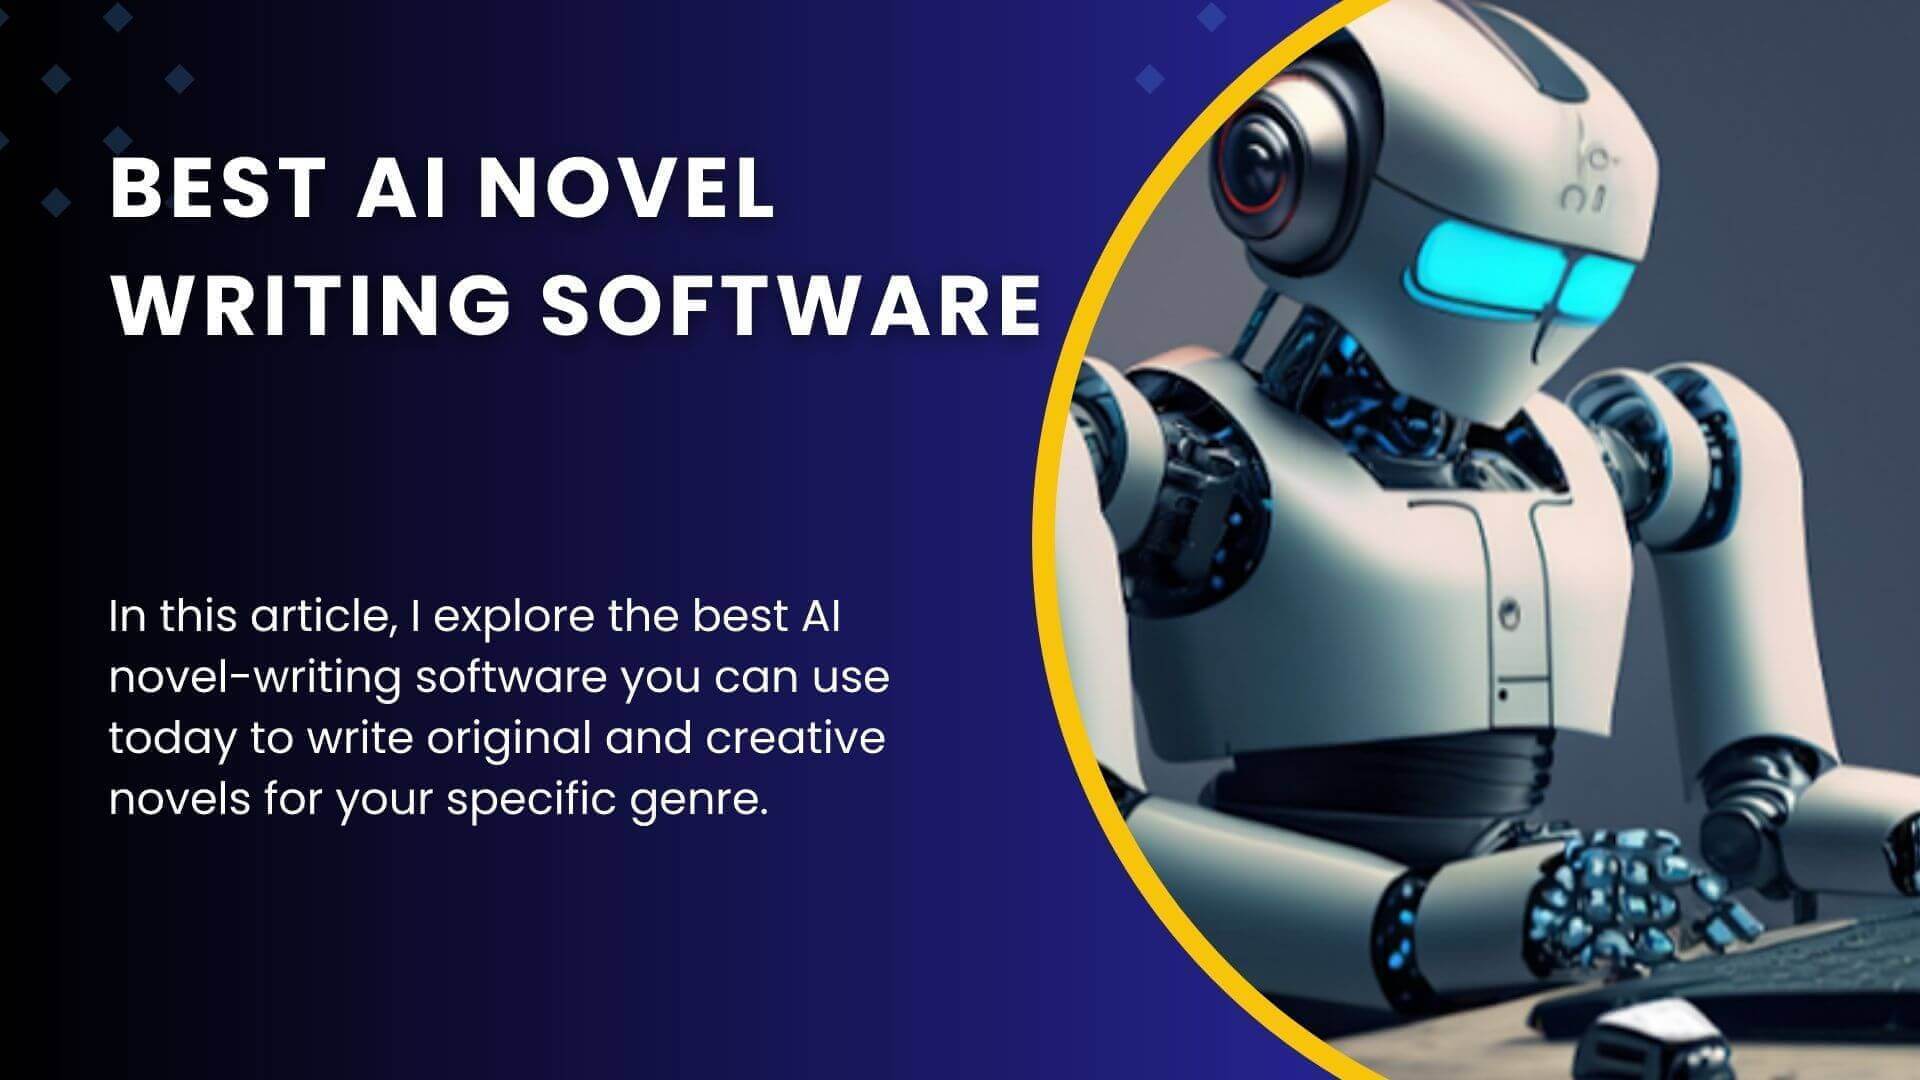 Featured Image- Best AI Novel Writing Software